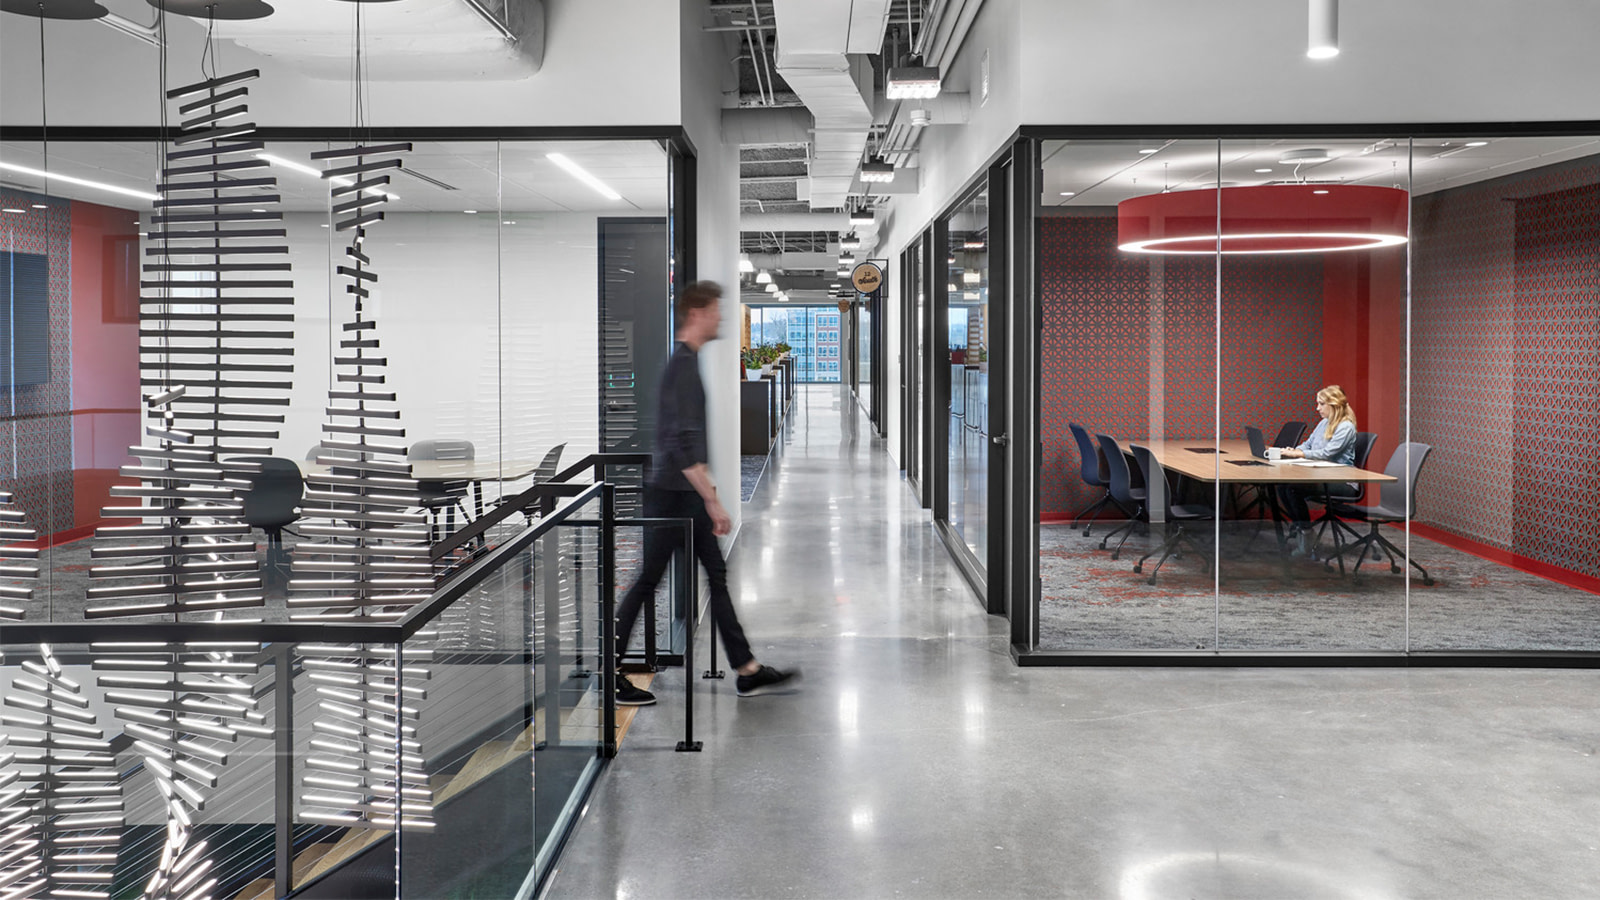 Corridors and alleyways help employees navigate the space that's filled with indoor plants